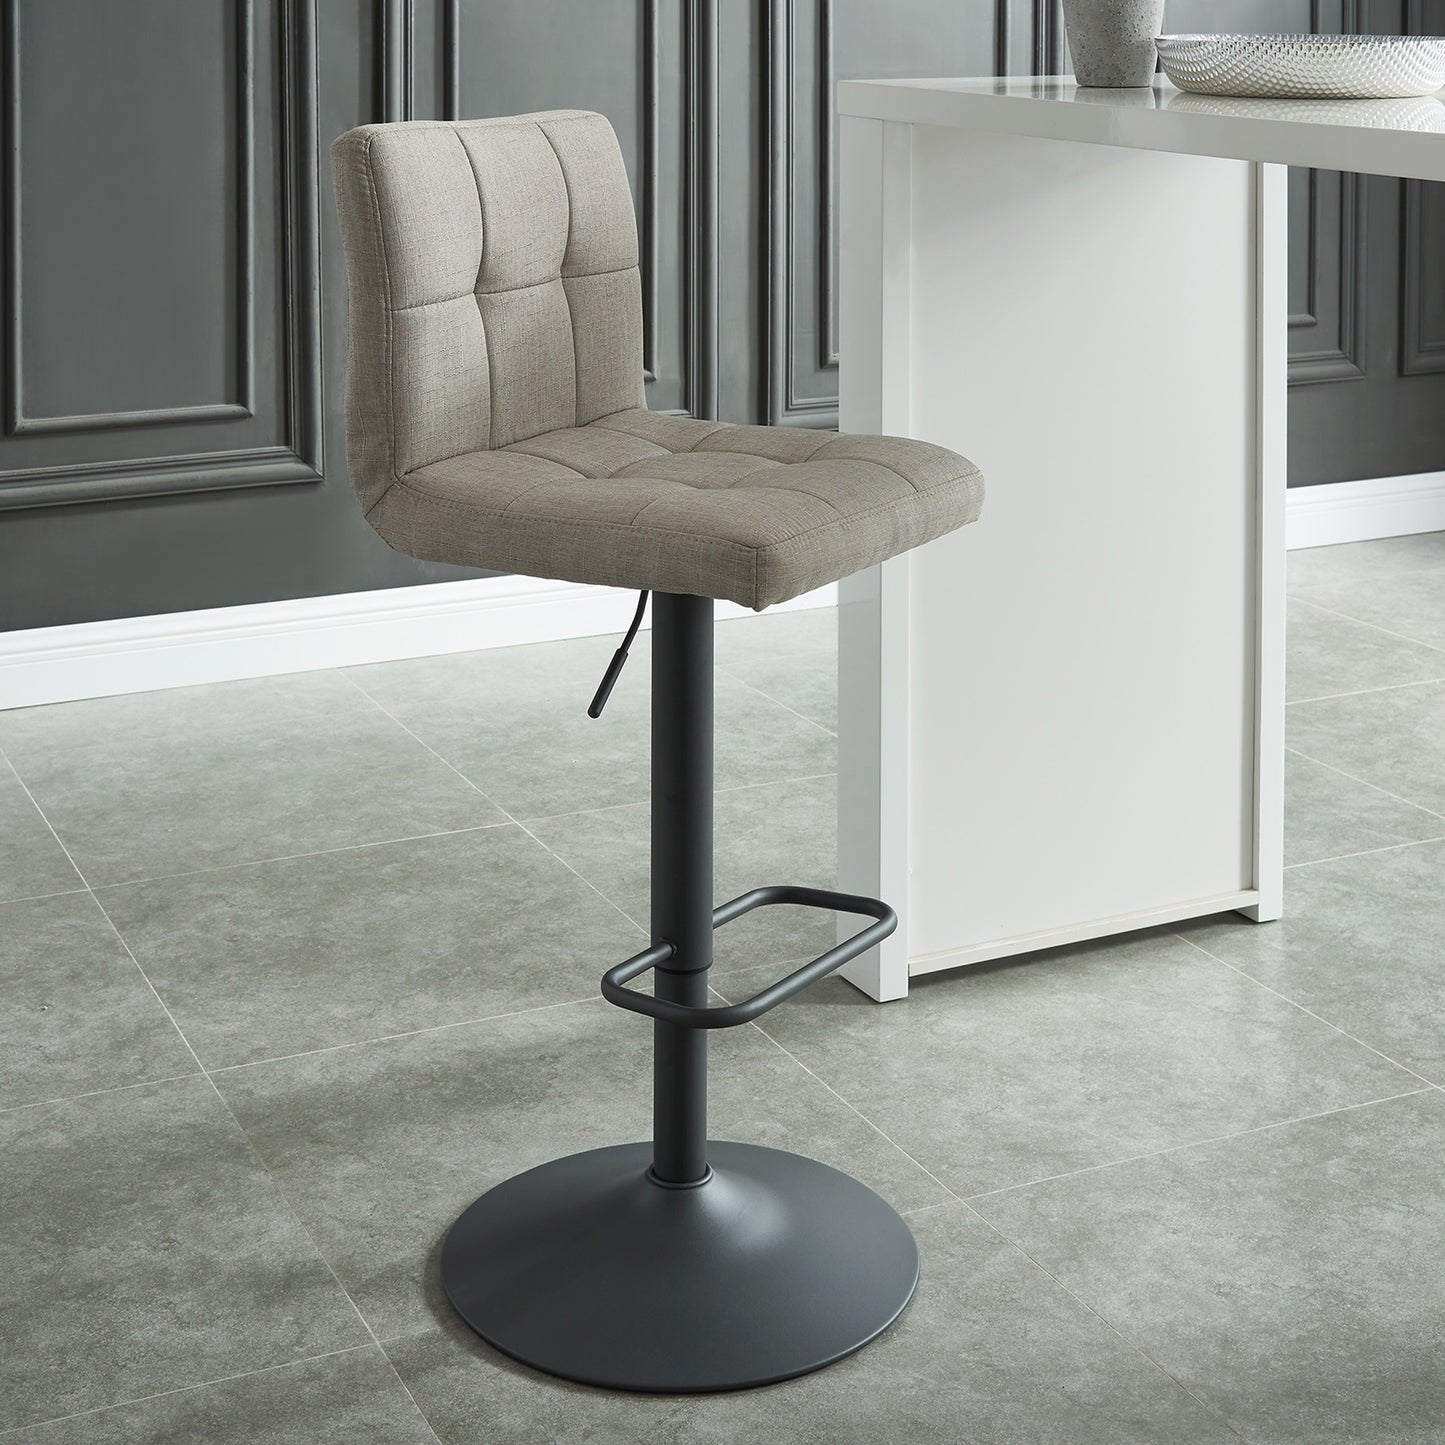 Sorb Adjustable Air Lift Stool, Set of 2 in Beige and Grey